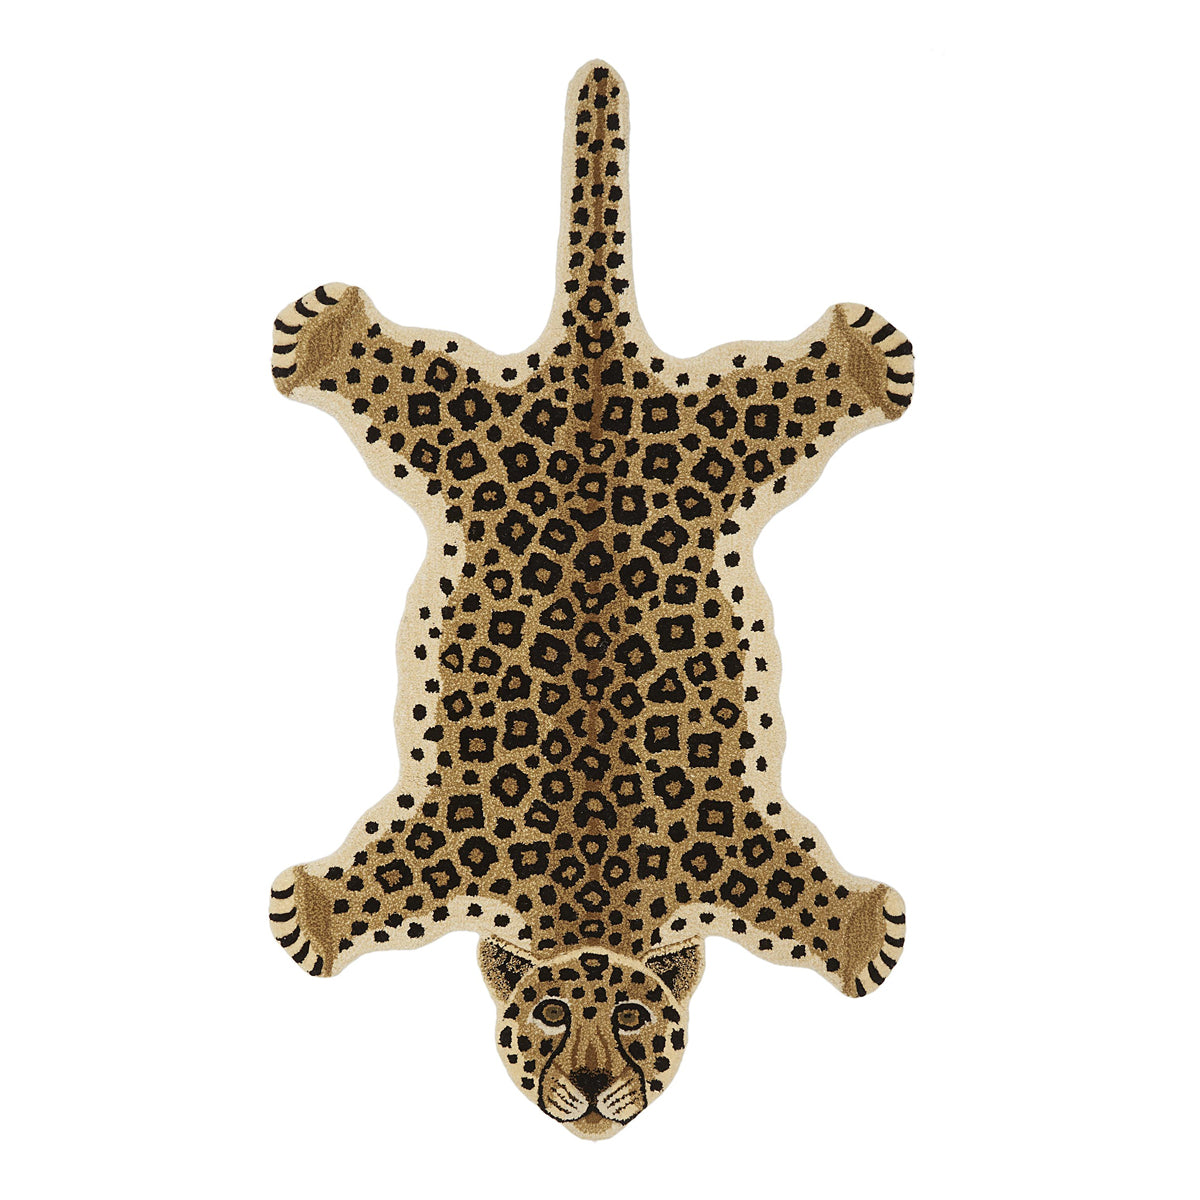 Loony Leopard Rug Large - Doing Goods